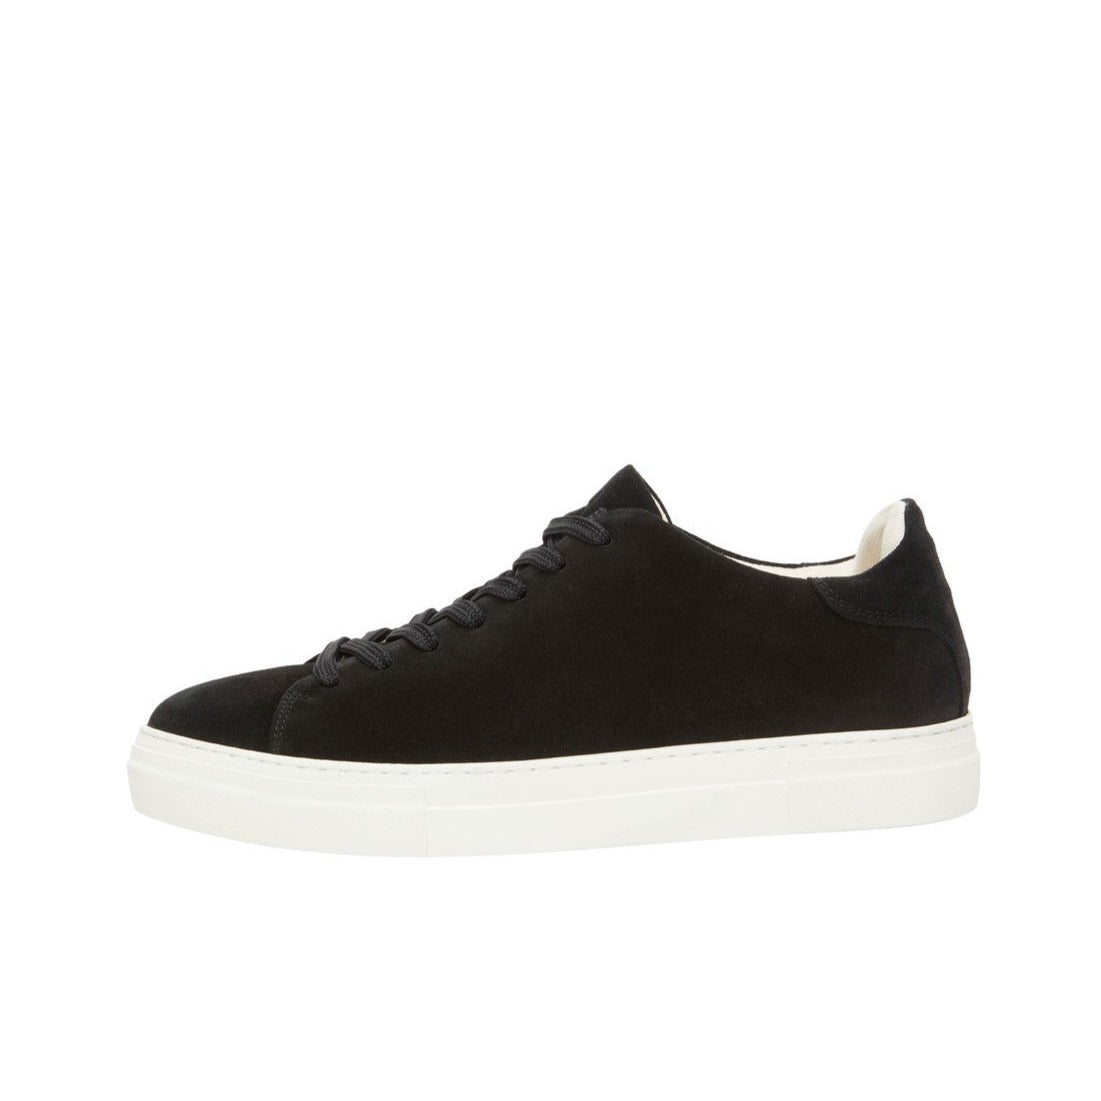 David Chunky Suede Trainer - Black